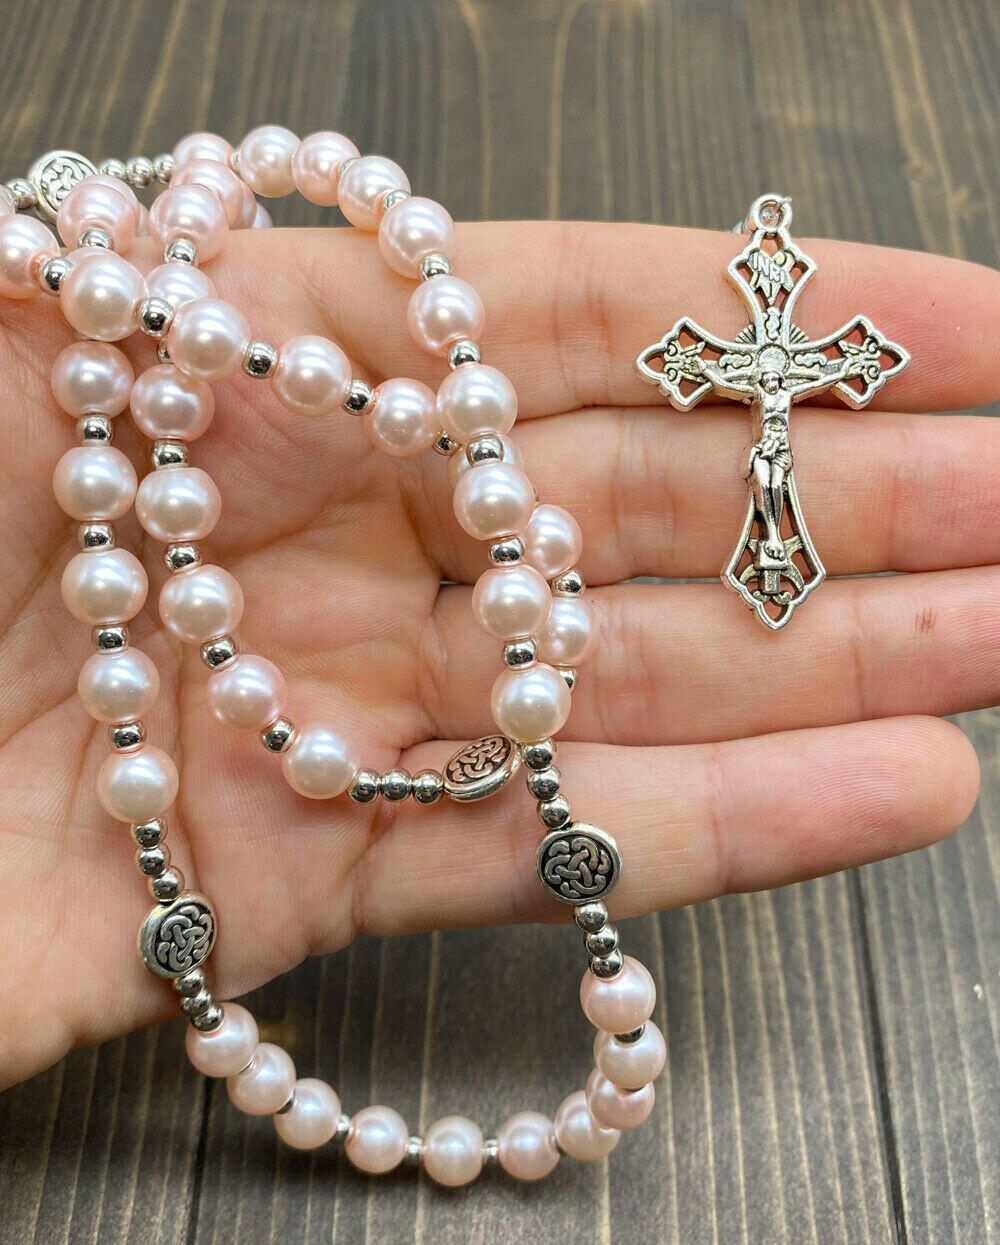 October - The Holy Rosary Month